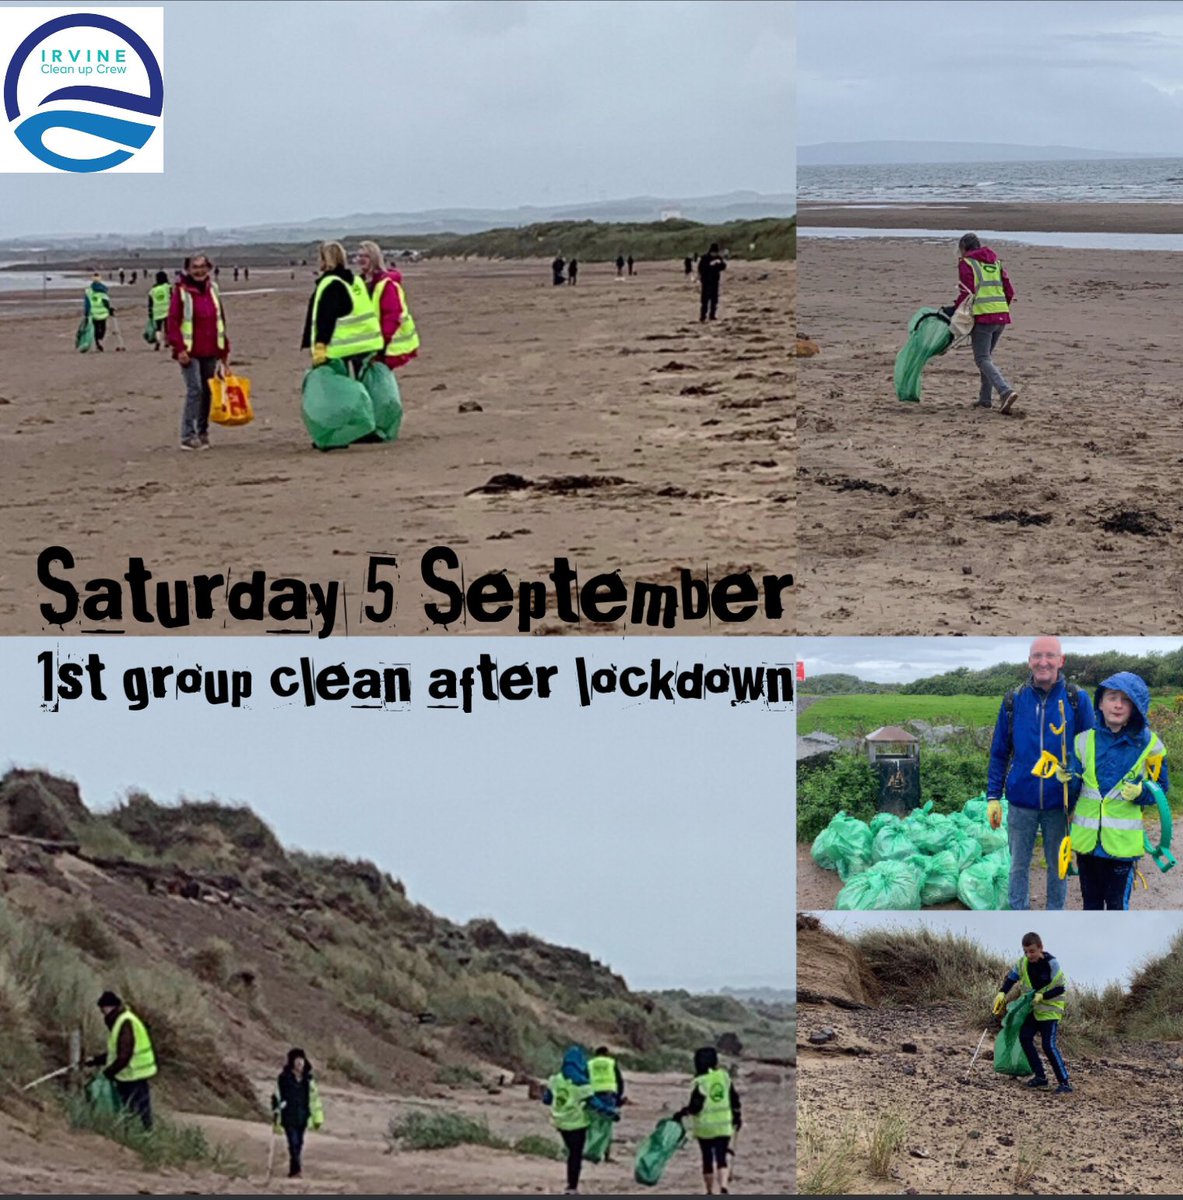 Thanks to everyone who joined us this morning. A huge haul of 20 sacks cleared in the wind and rain. It was great to have our first group clean up since lockdown. Great to see so many new volunteers #mybeachyourbeach #loveirvinebeach